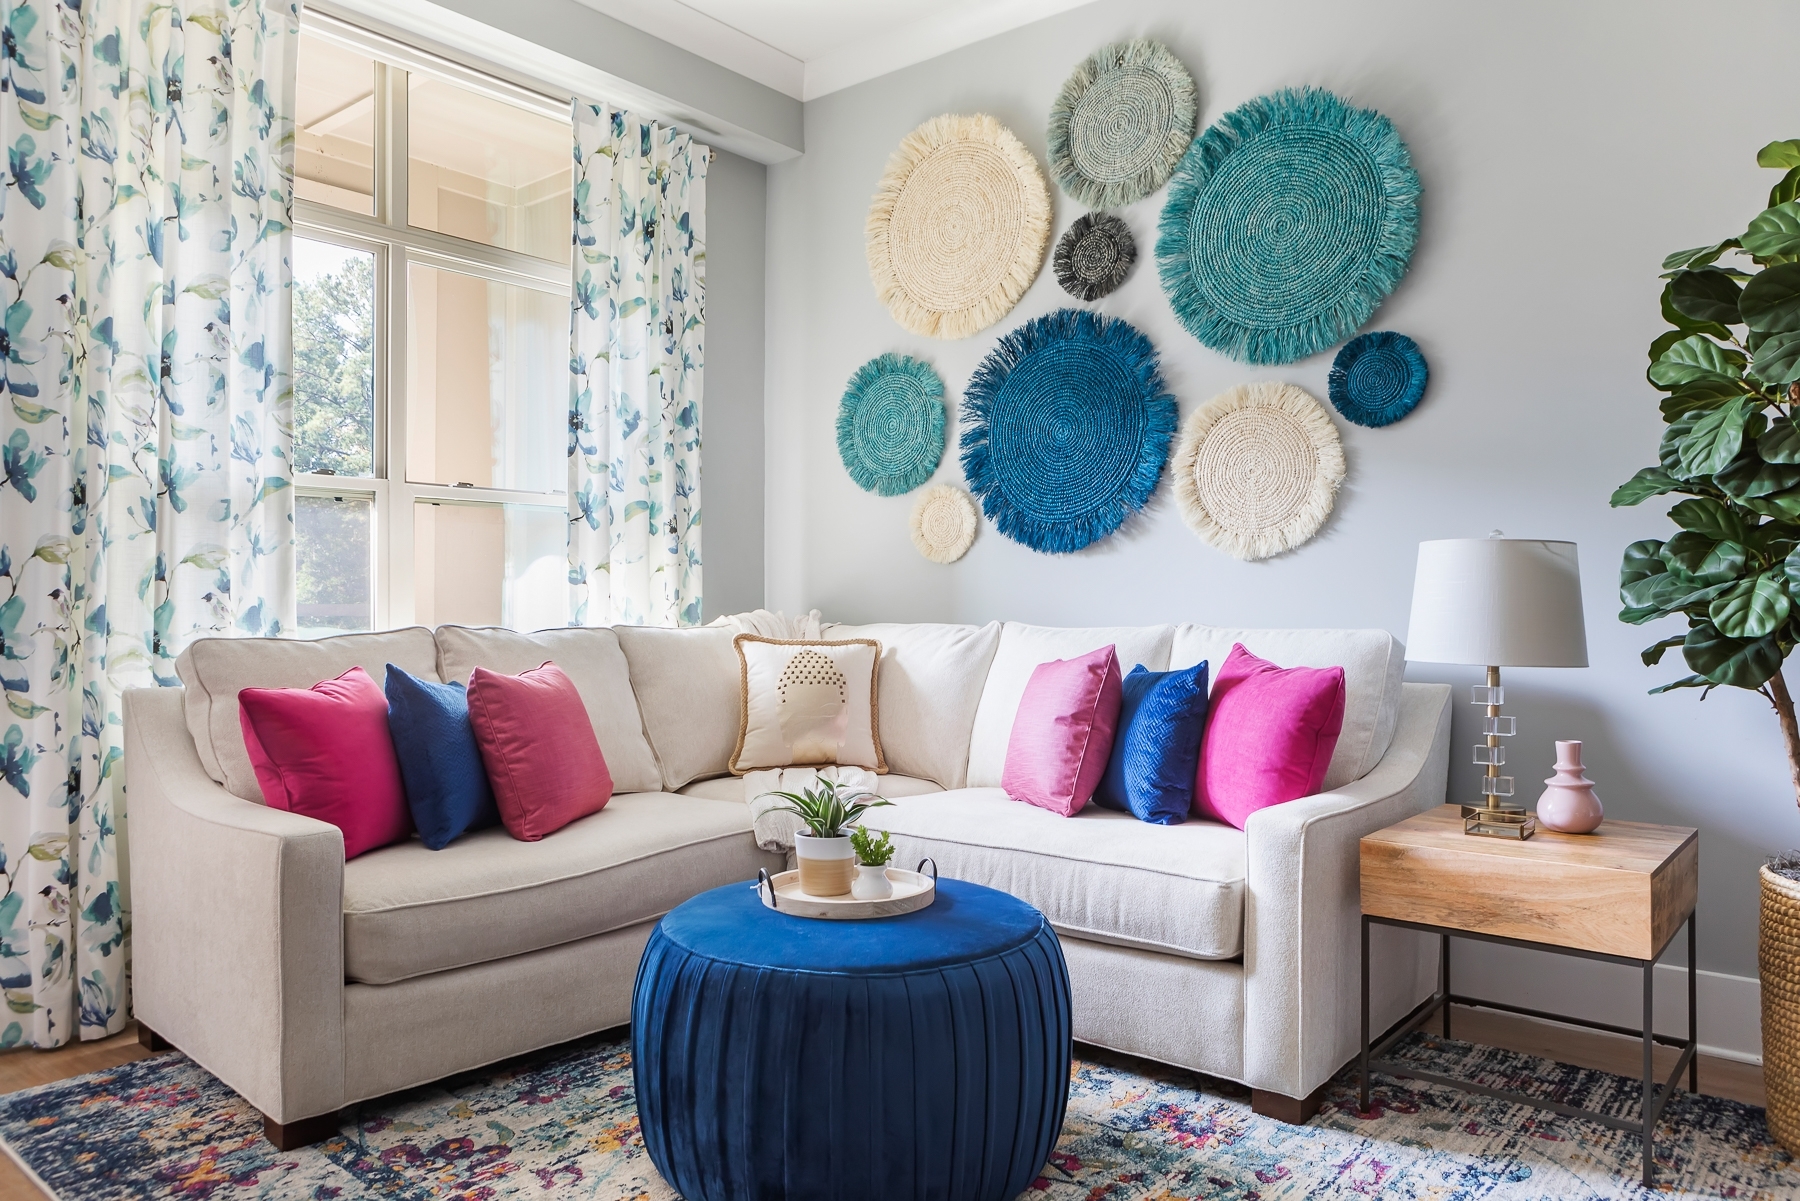 A colorful living room featuring bold accent colors in ottoman, pillows and wall art 